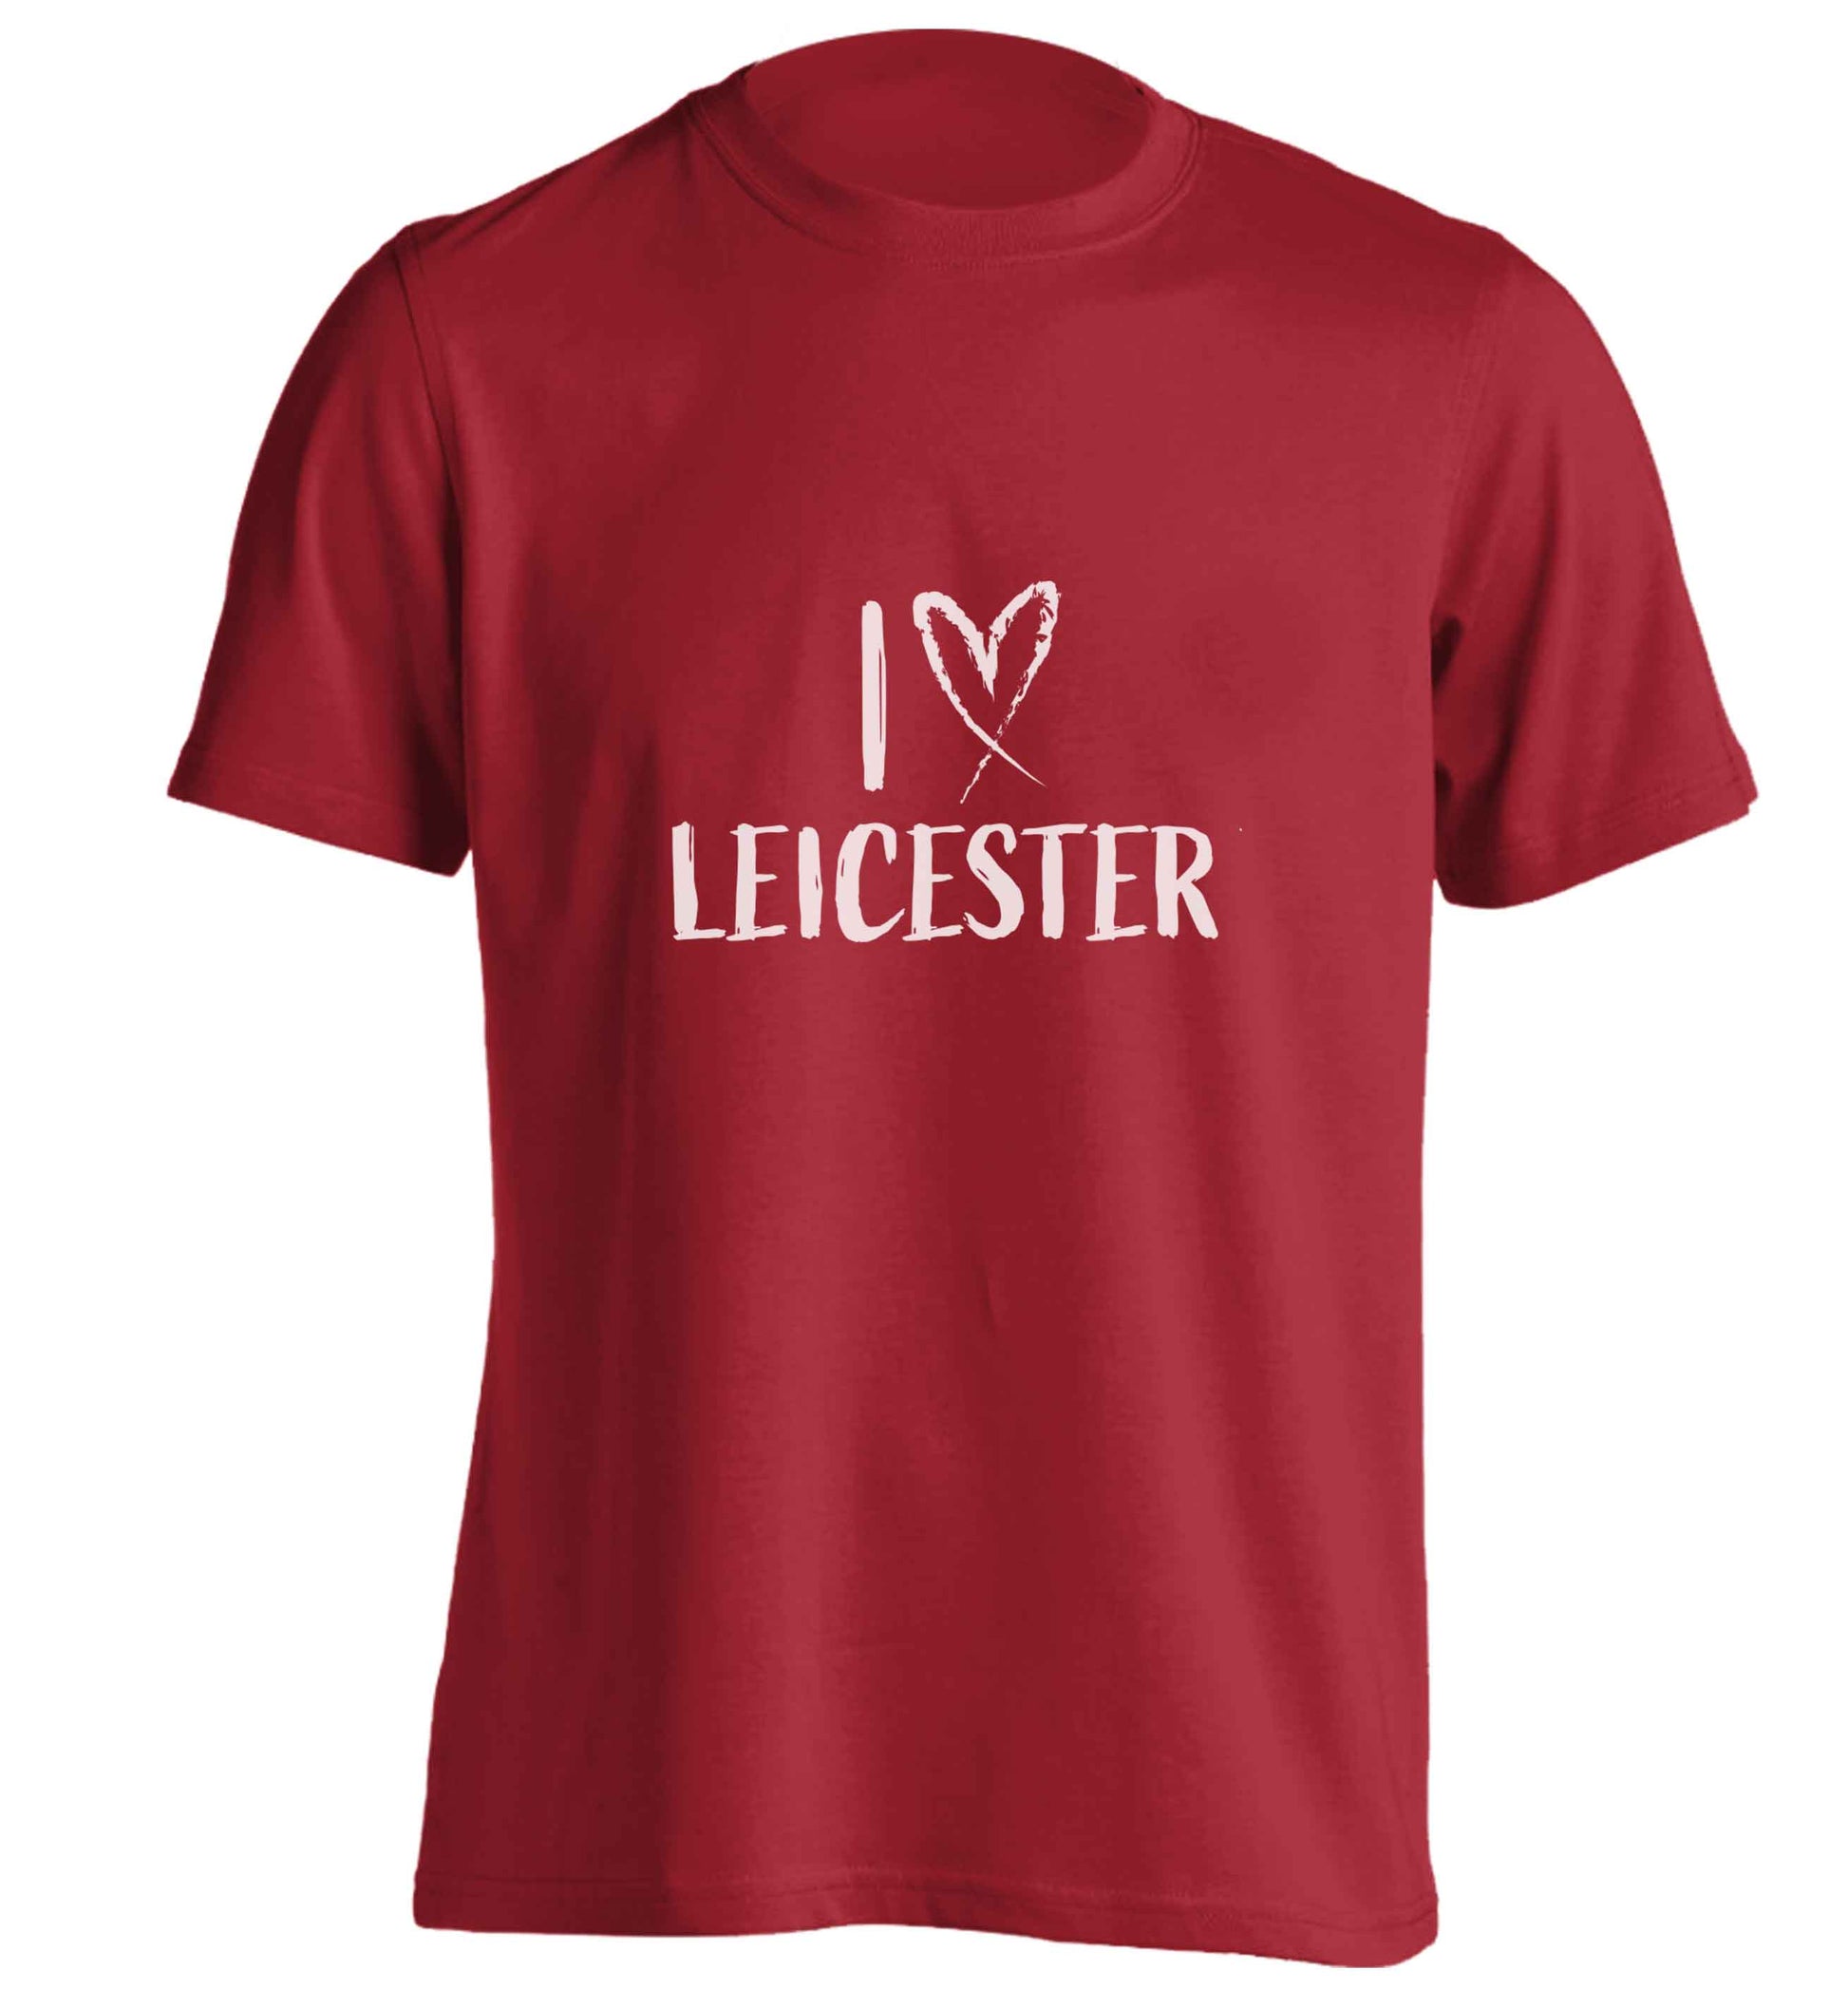 I love Leicester adults unisex red Tshirt 2XL